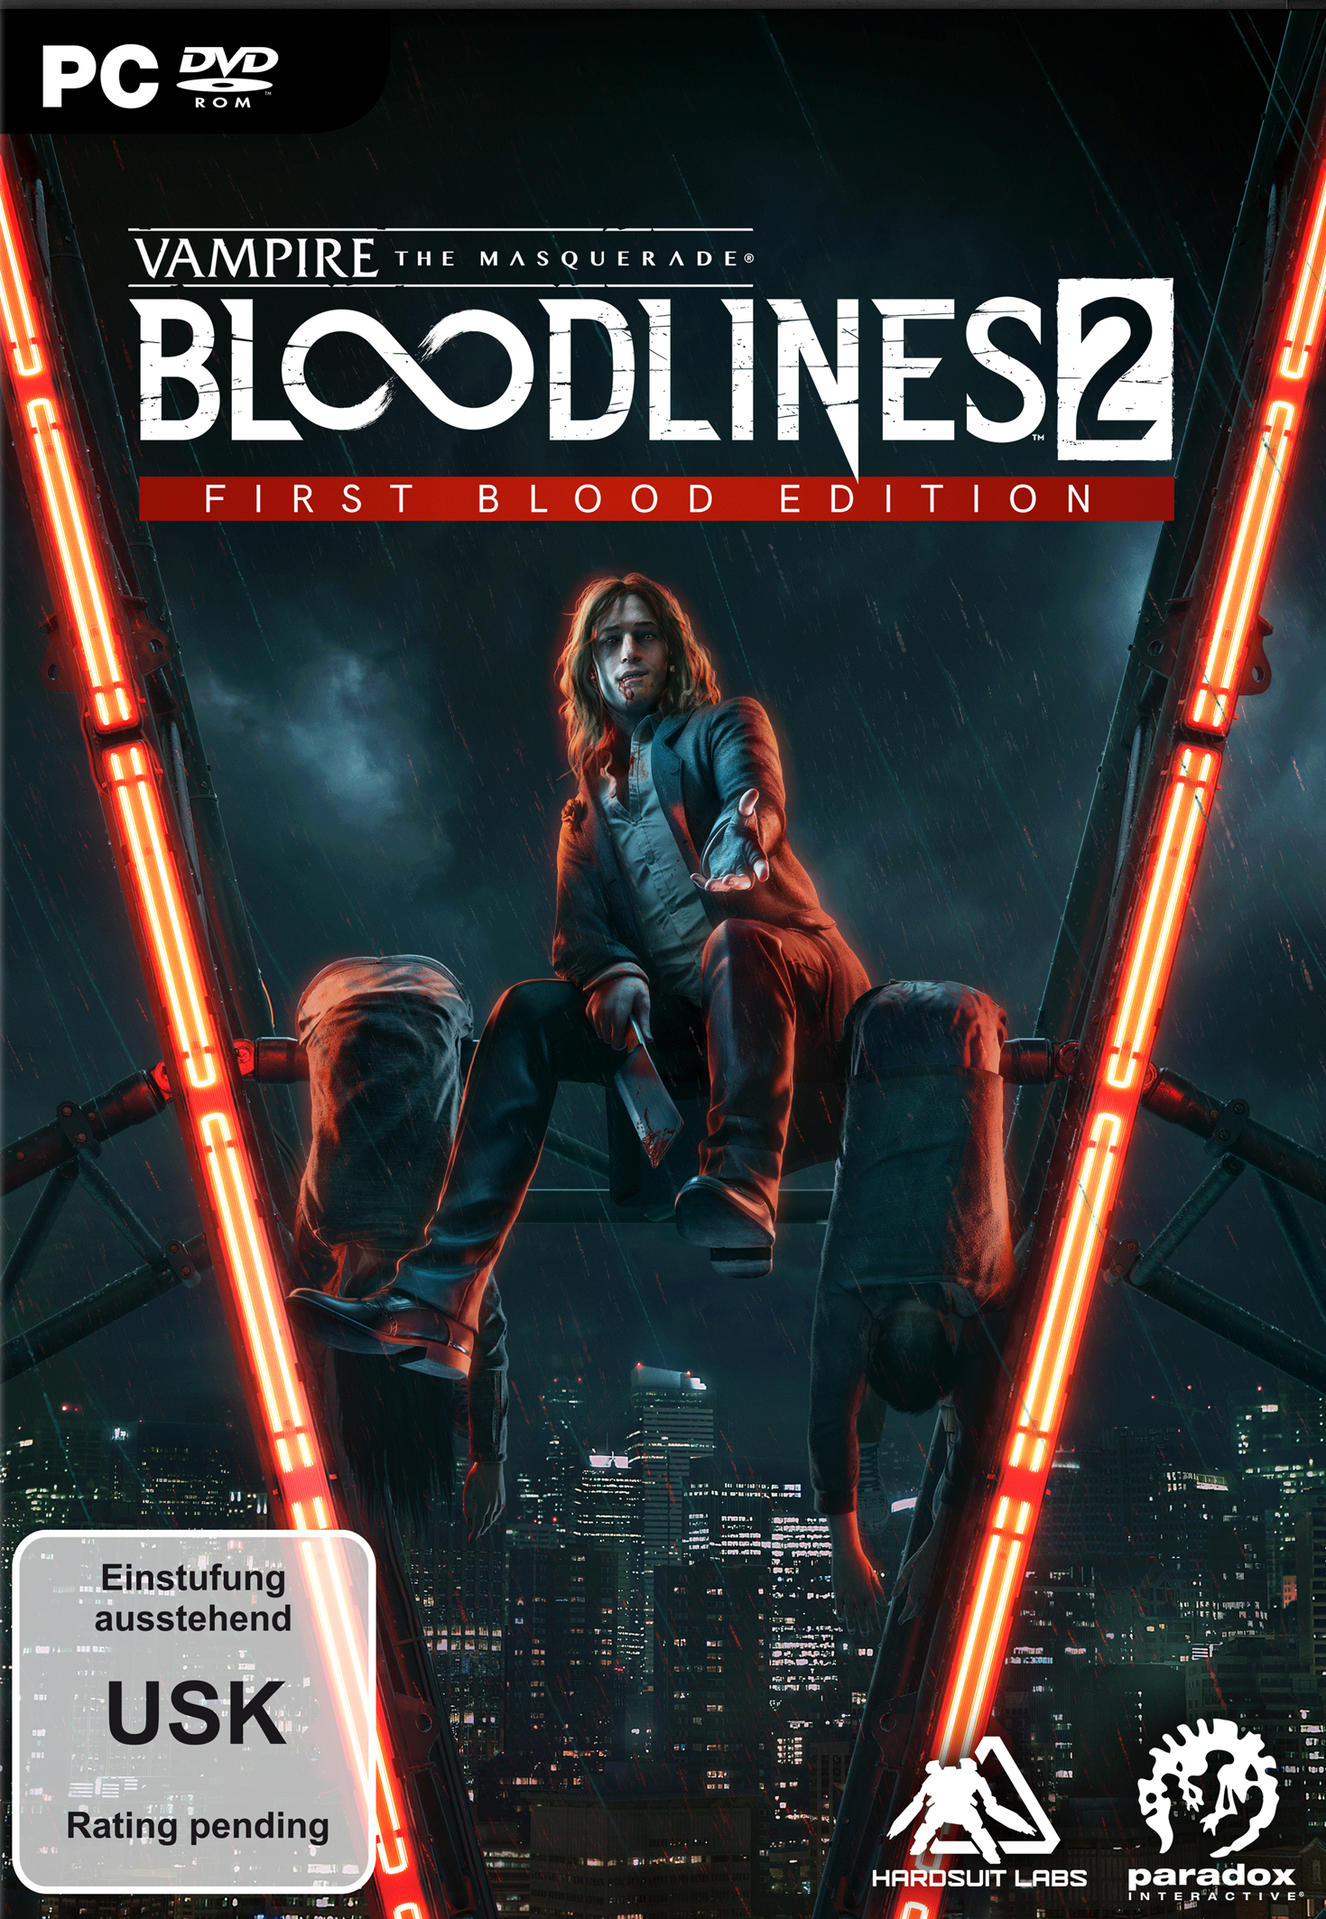 Vampire: The Masquerade - Bloodlines Blood 2 Edition - [PC] First